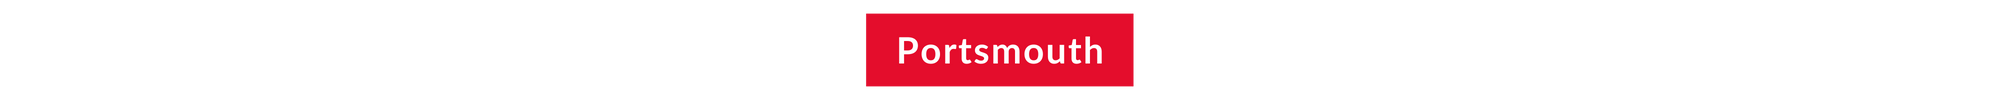 The word Portsmouth in a red box